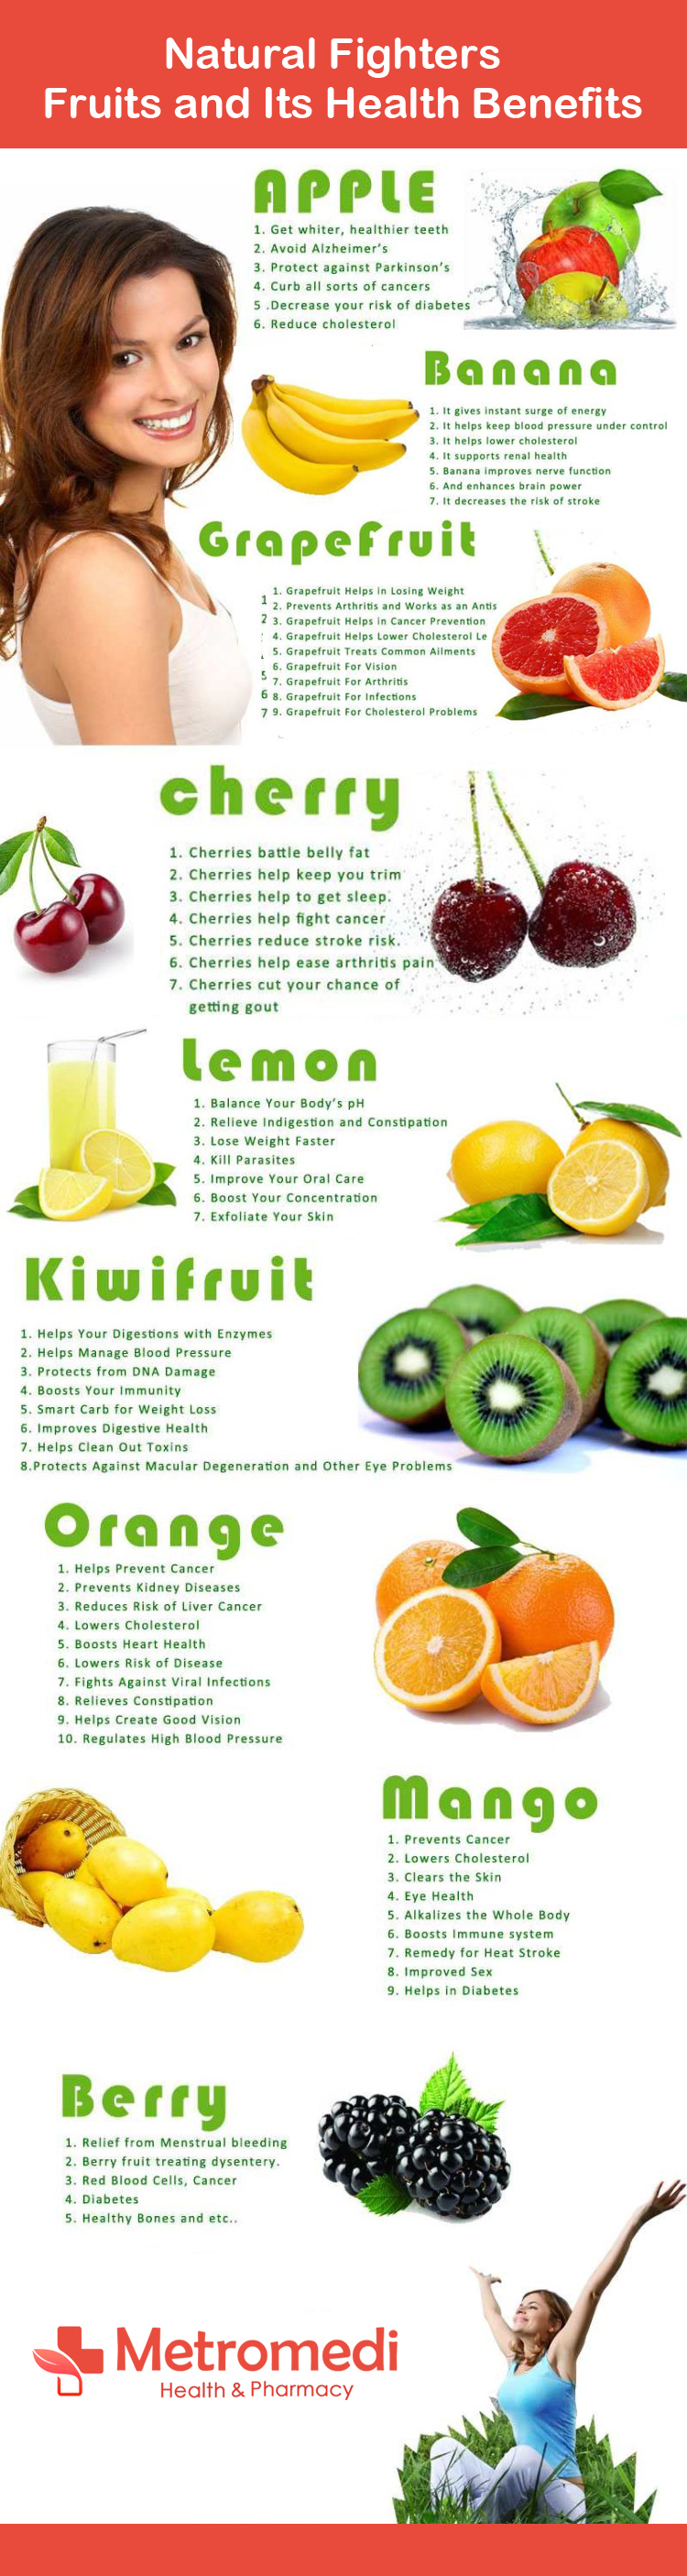 health-benefits-of-fruits-infographic copy